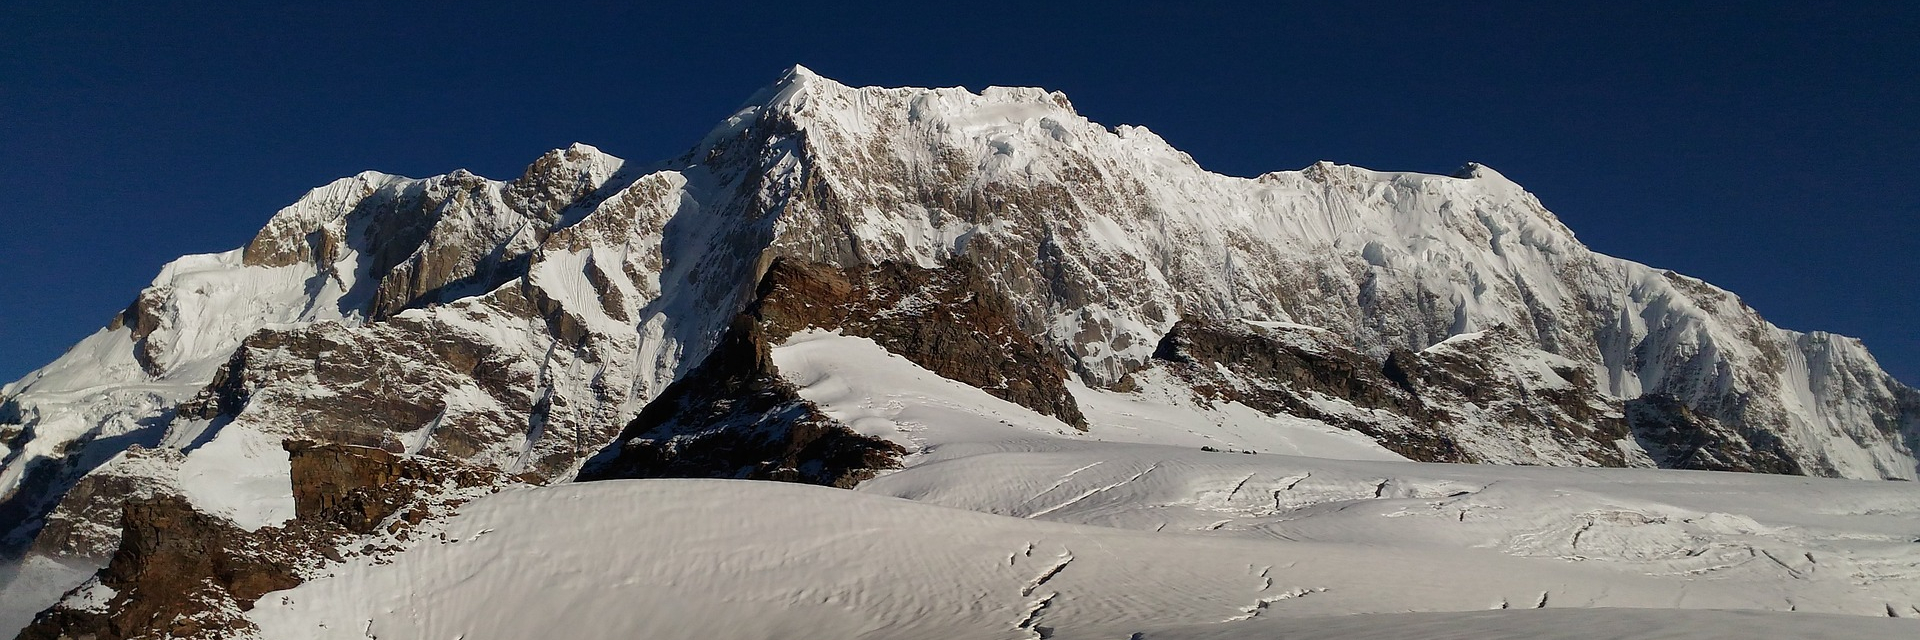 Climbing & Expeditions in Annapurna Region